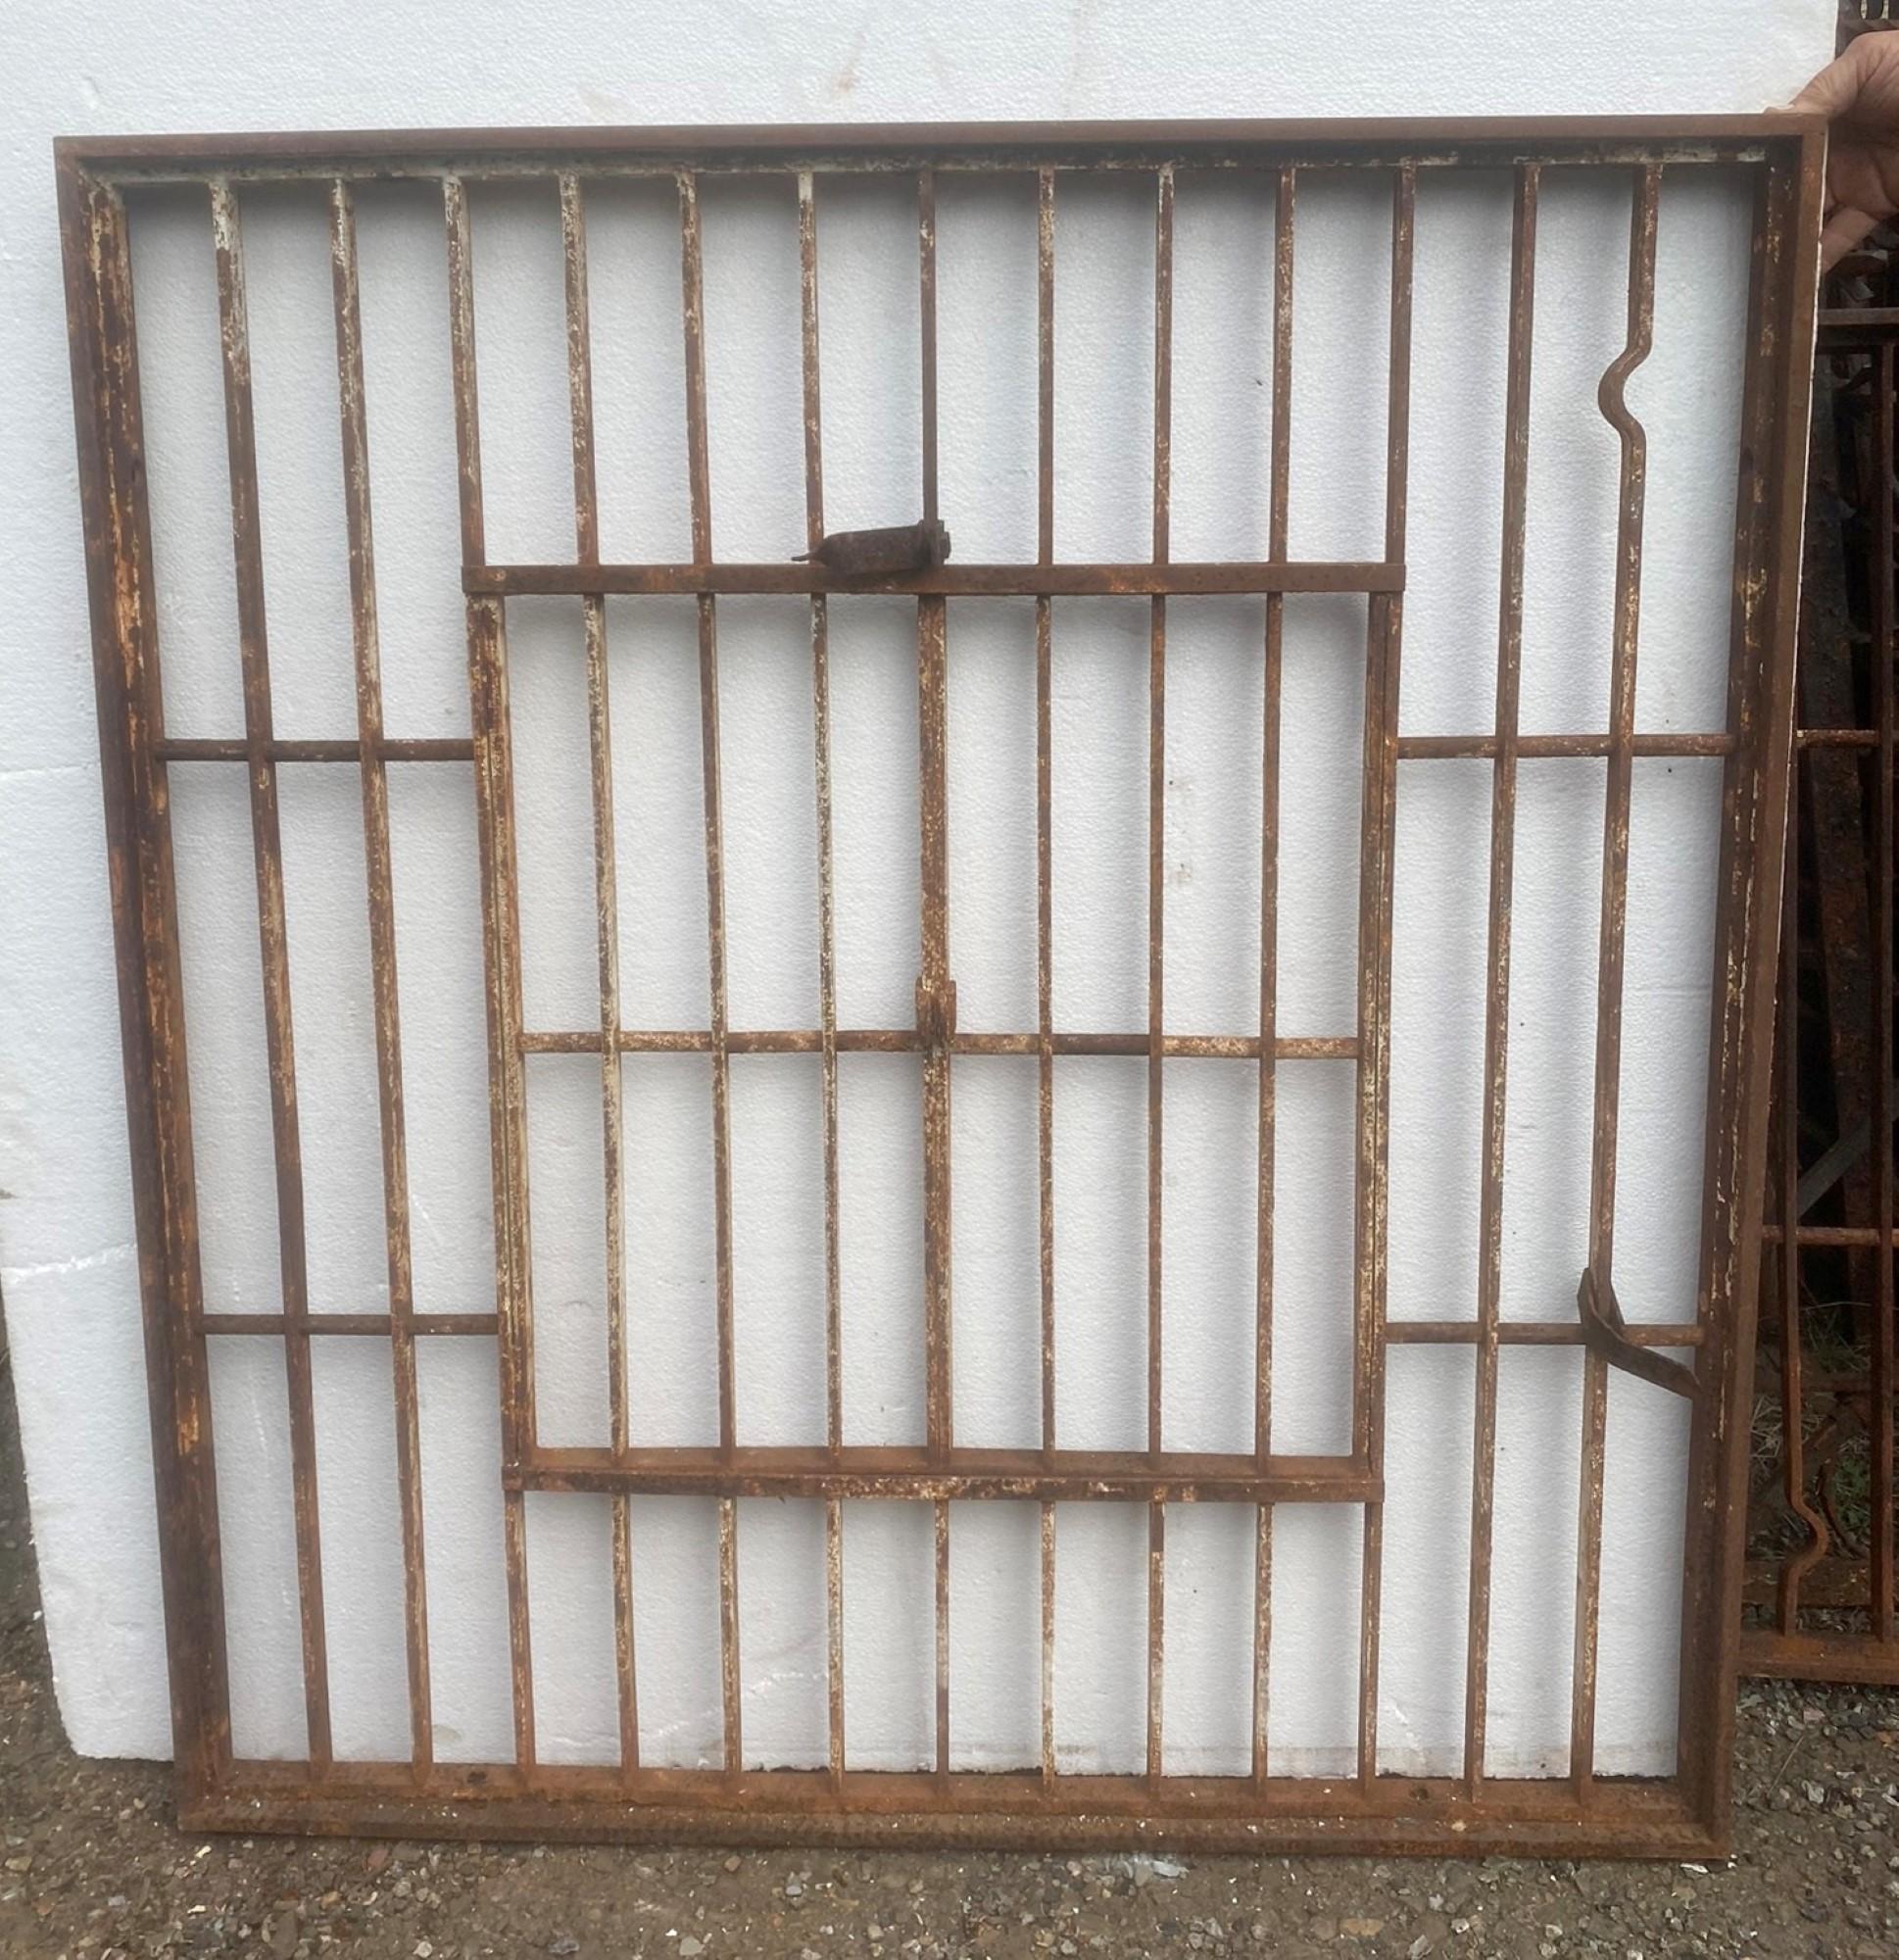 North American 1920s Salvaged Wrought Iron Jail Style Window with Double Door Opening